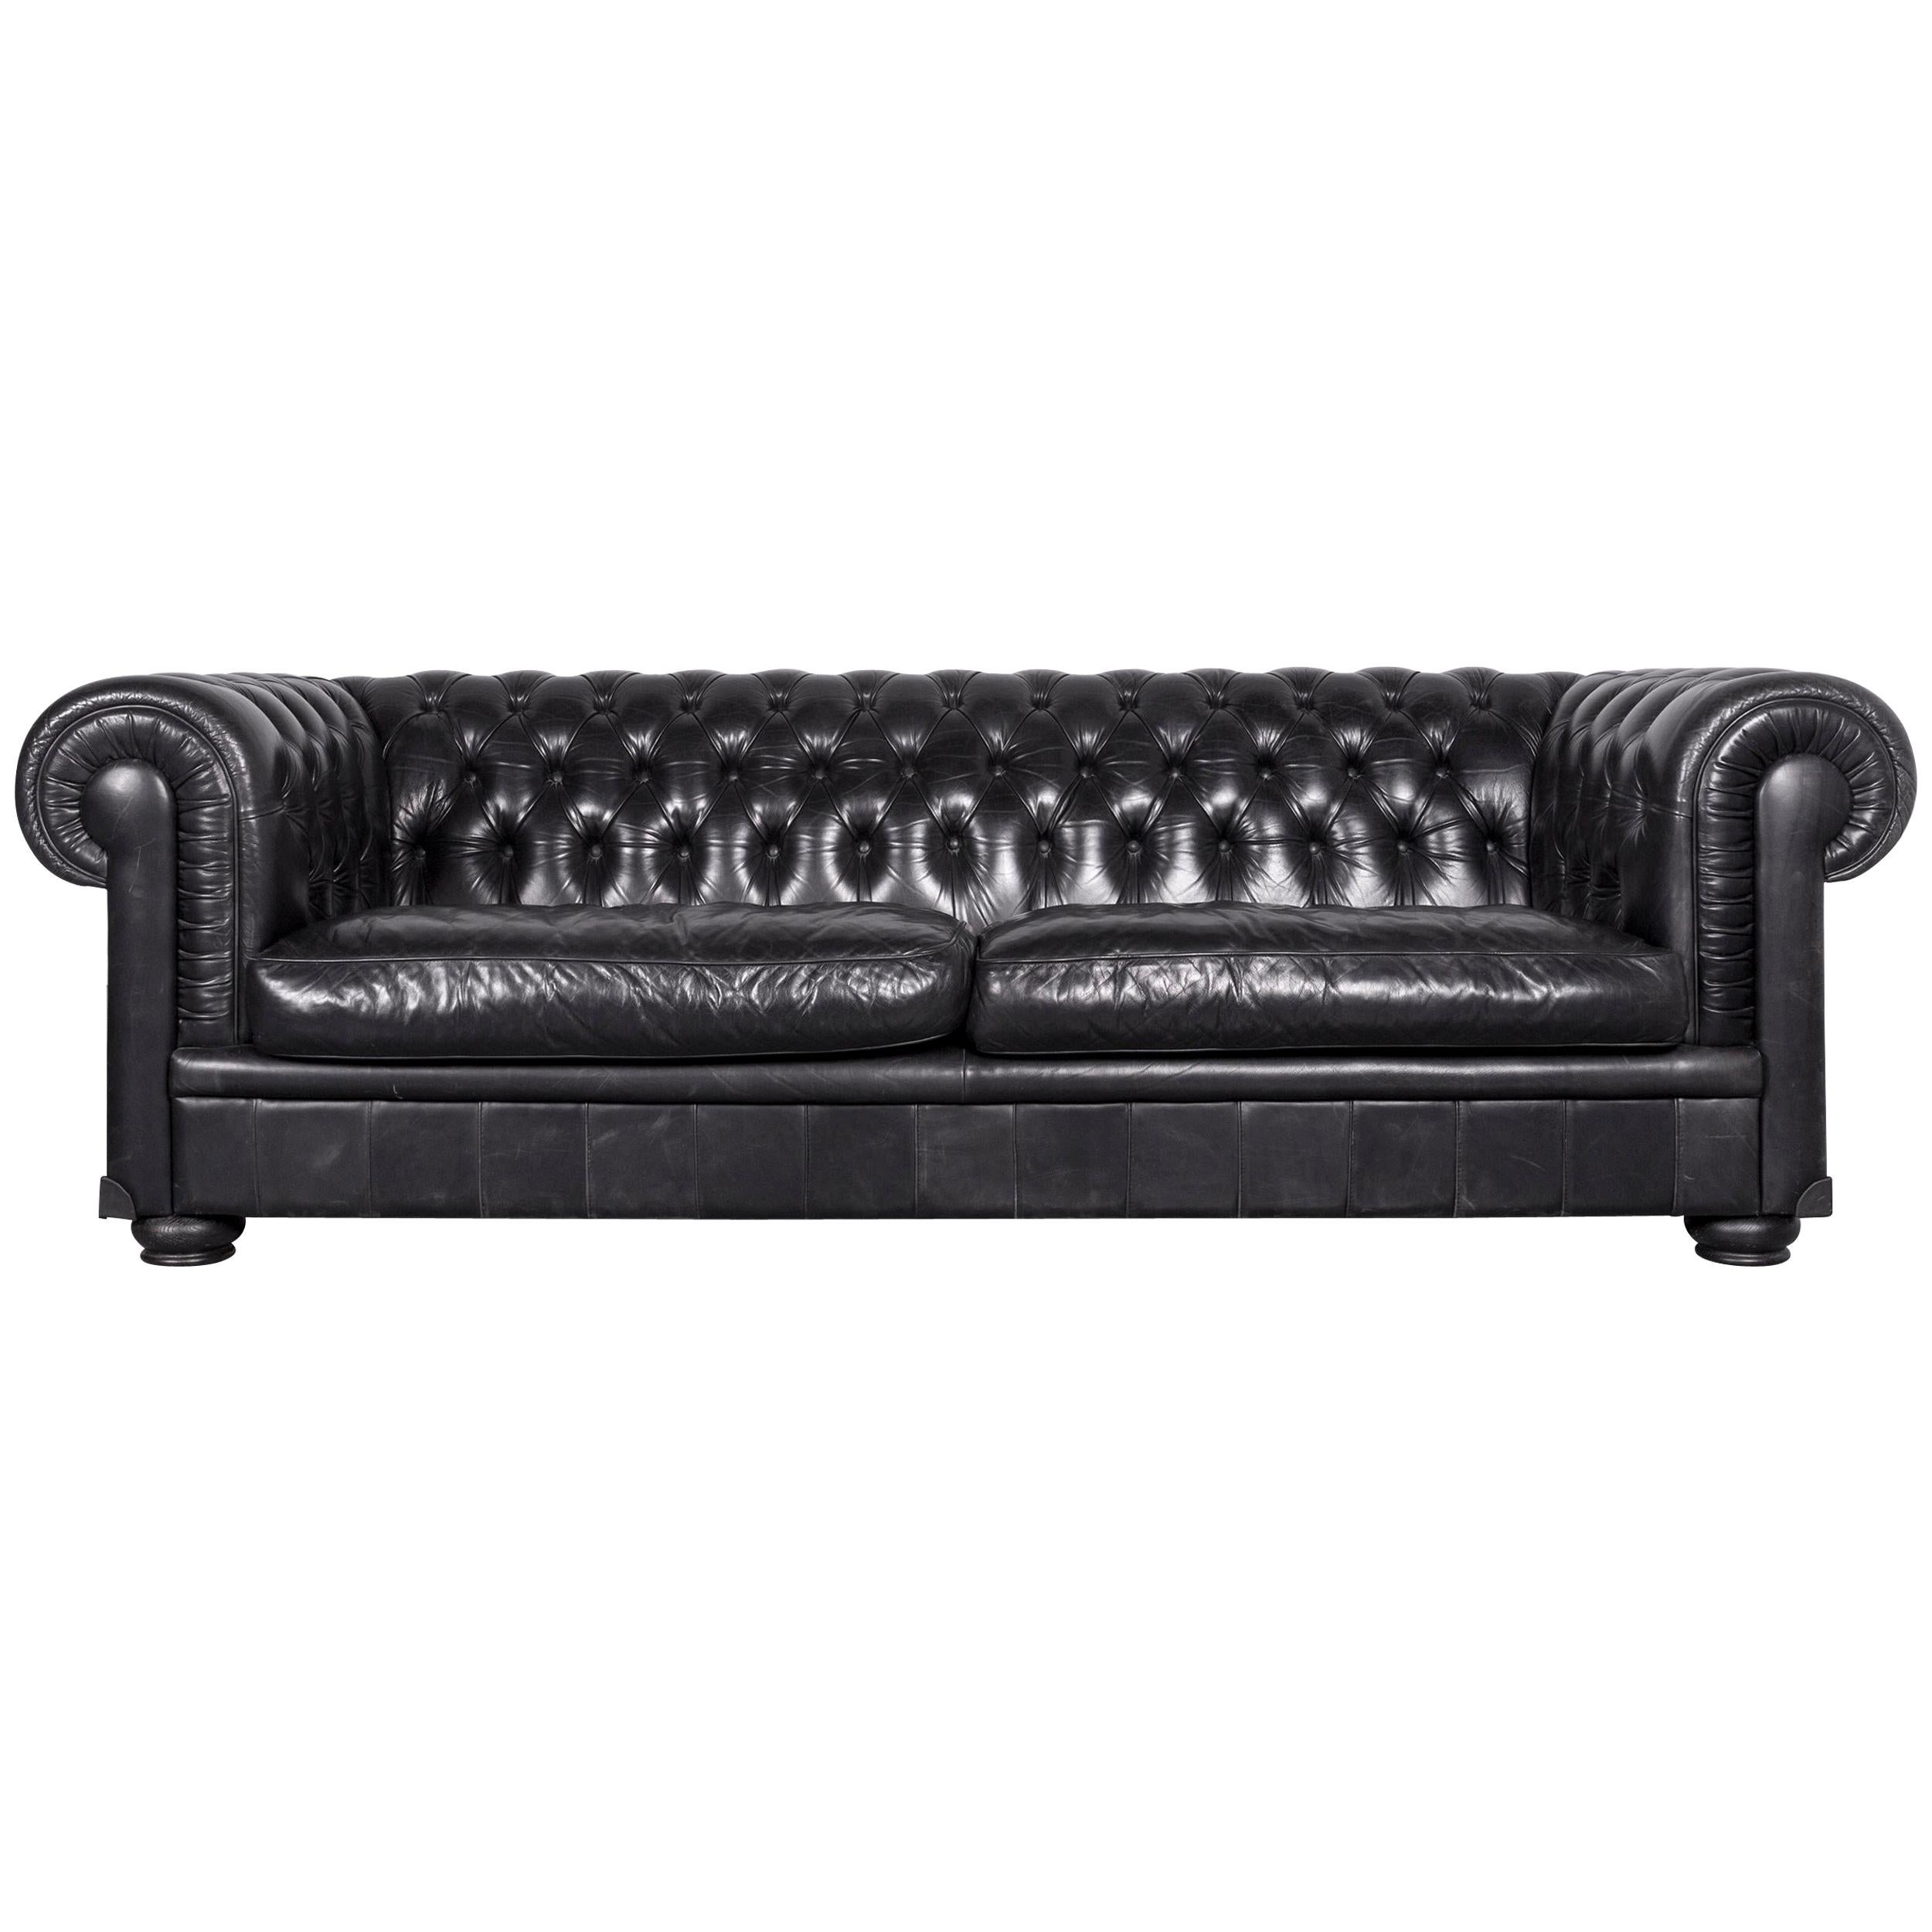 Natuzzi King Designer Leather Sofa Three-Seat Couch Black in Chesterfield Style